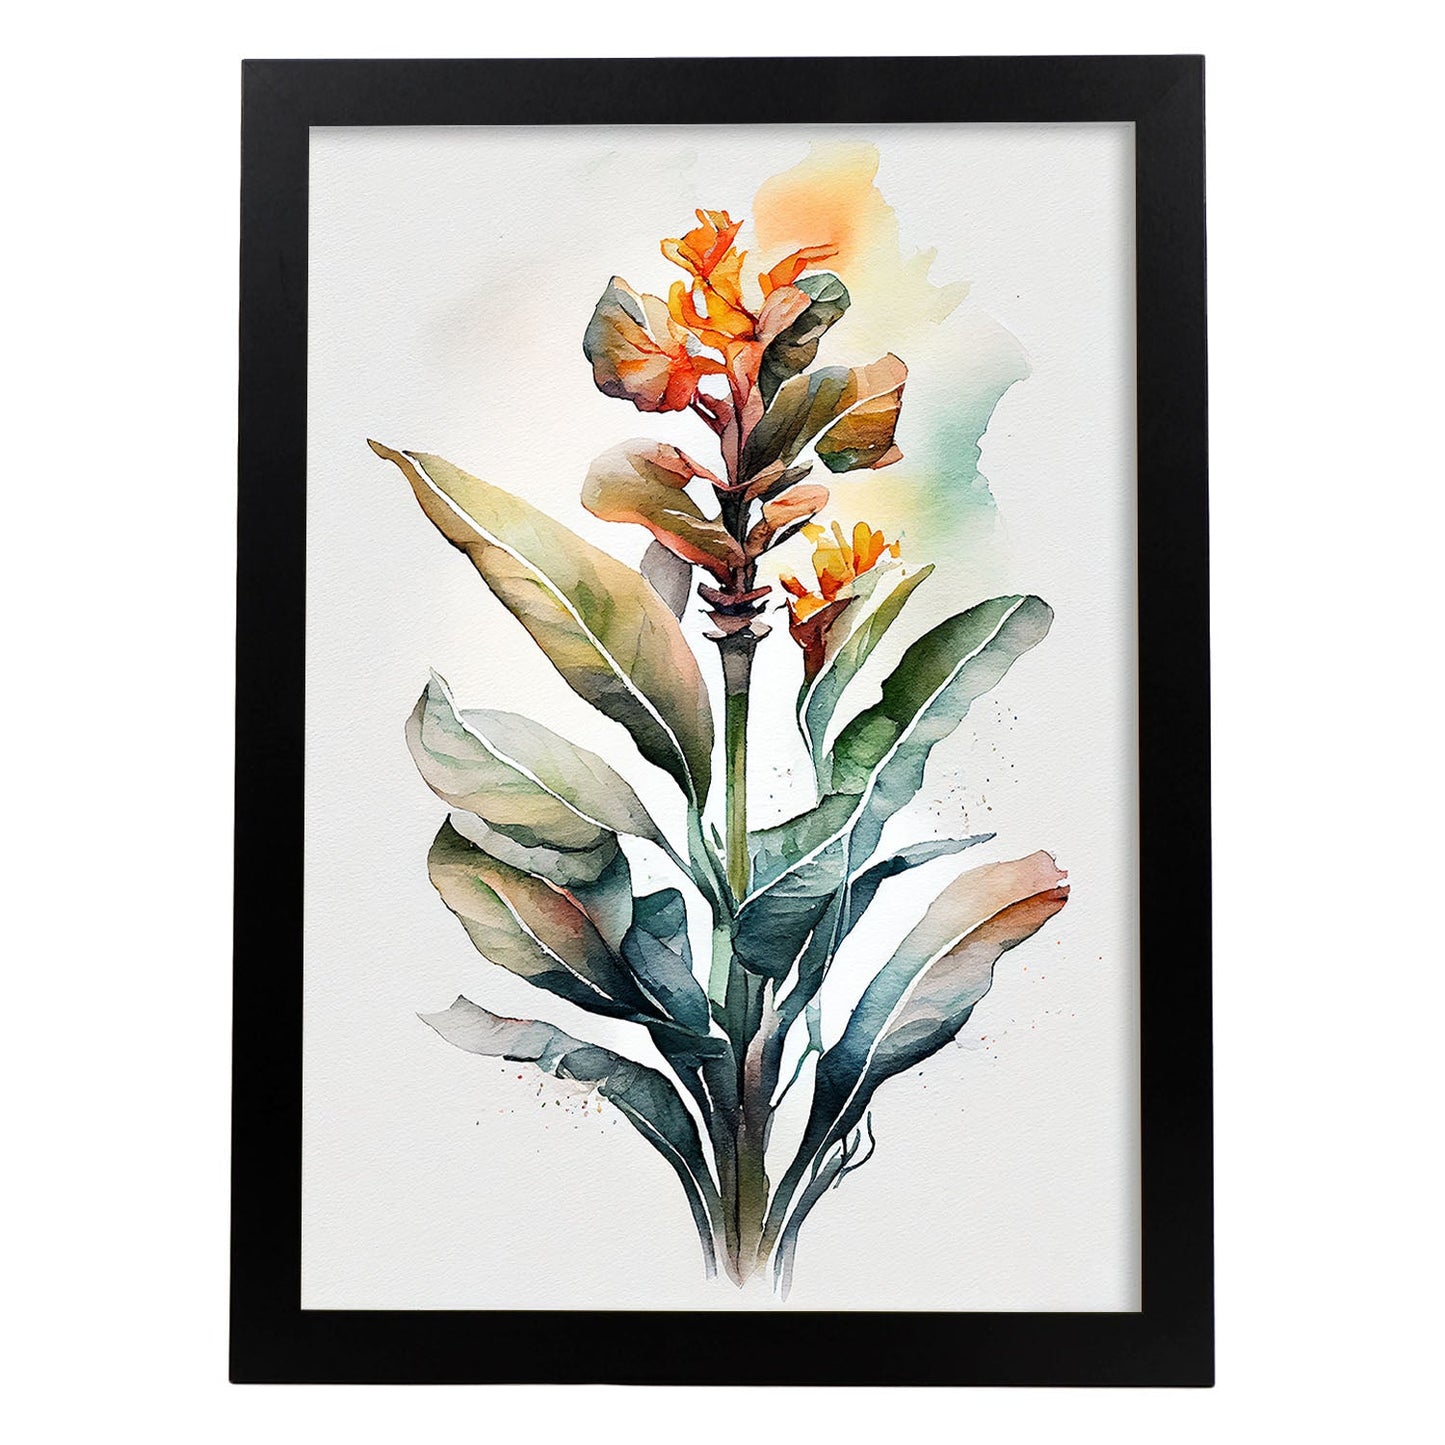 Nacnic watercolor minmal Canna_1. Aesthetic Wall Art Prints for Bedroom or Living Room Design.